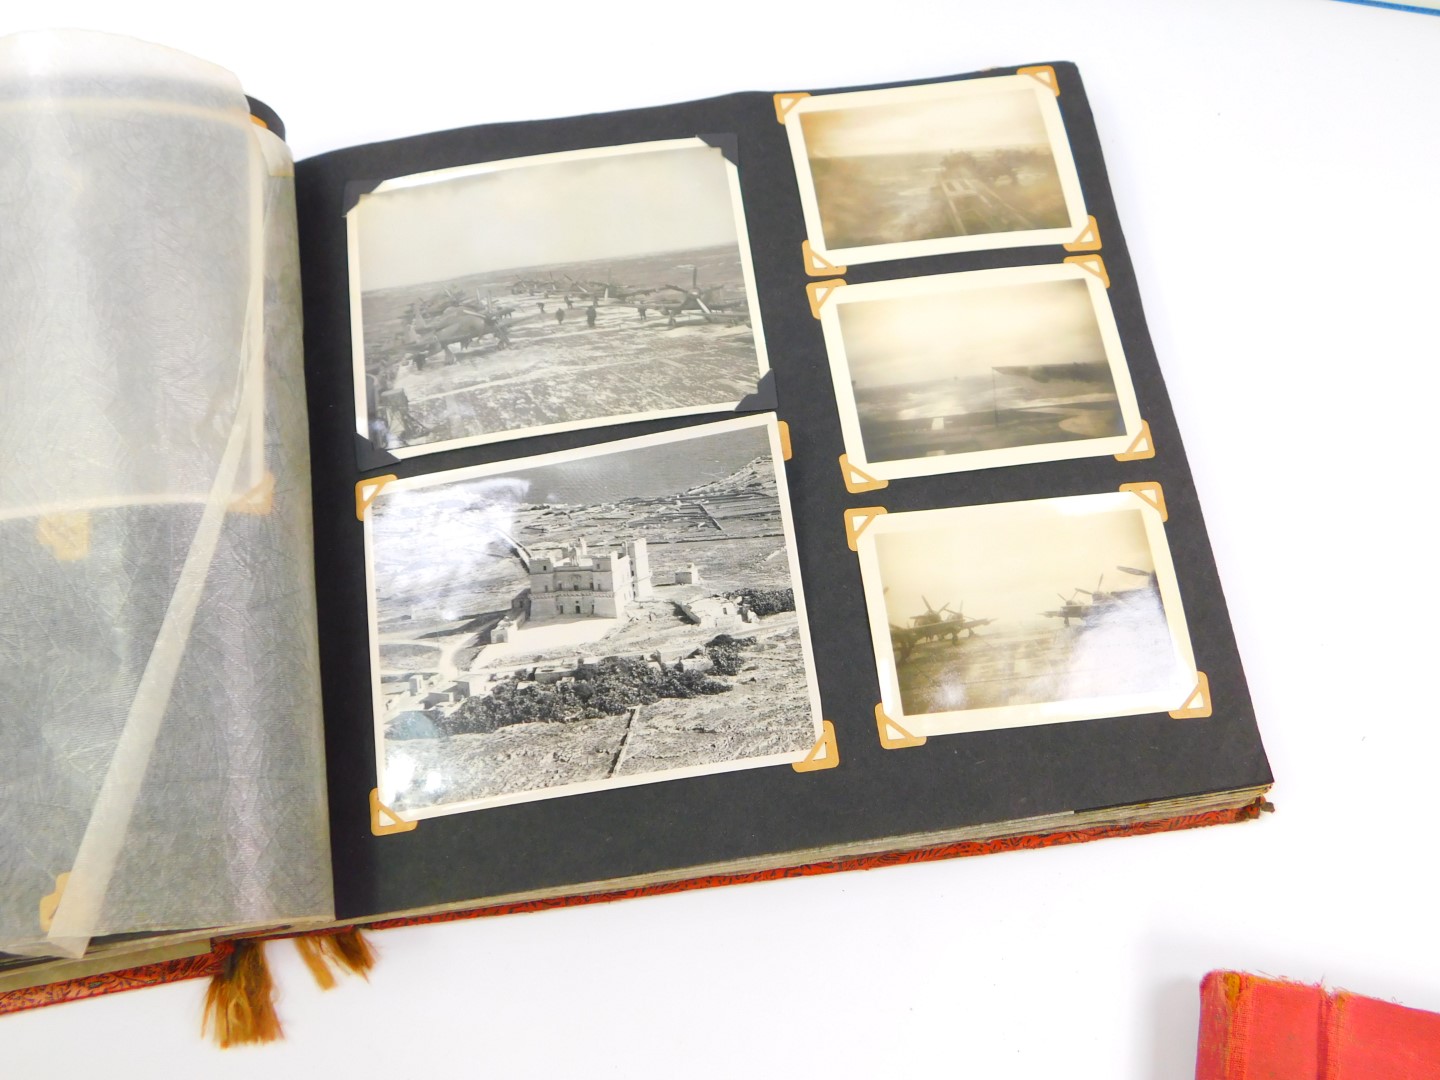 A Korean War period naval photograph album for a crew member of HMS Glory, showing life aboard ship, - Image 9 of 10